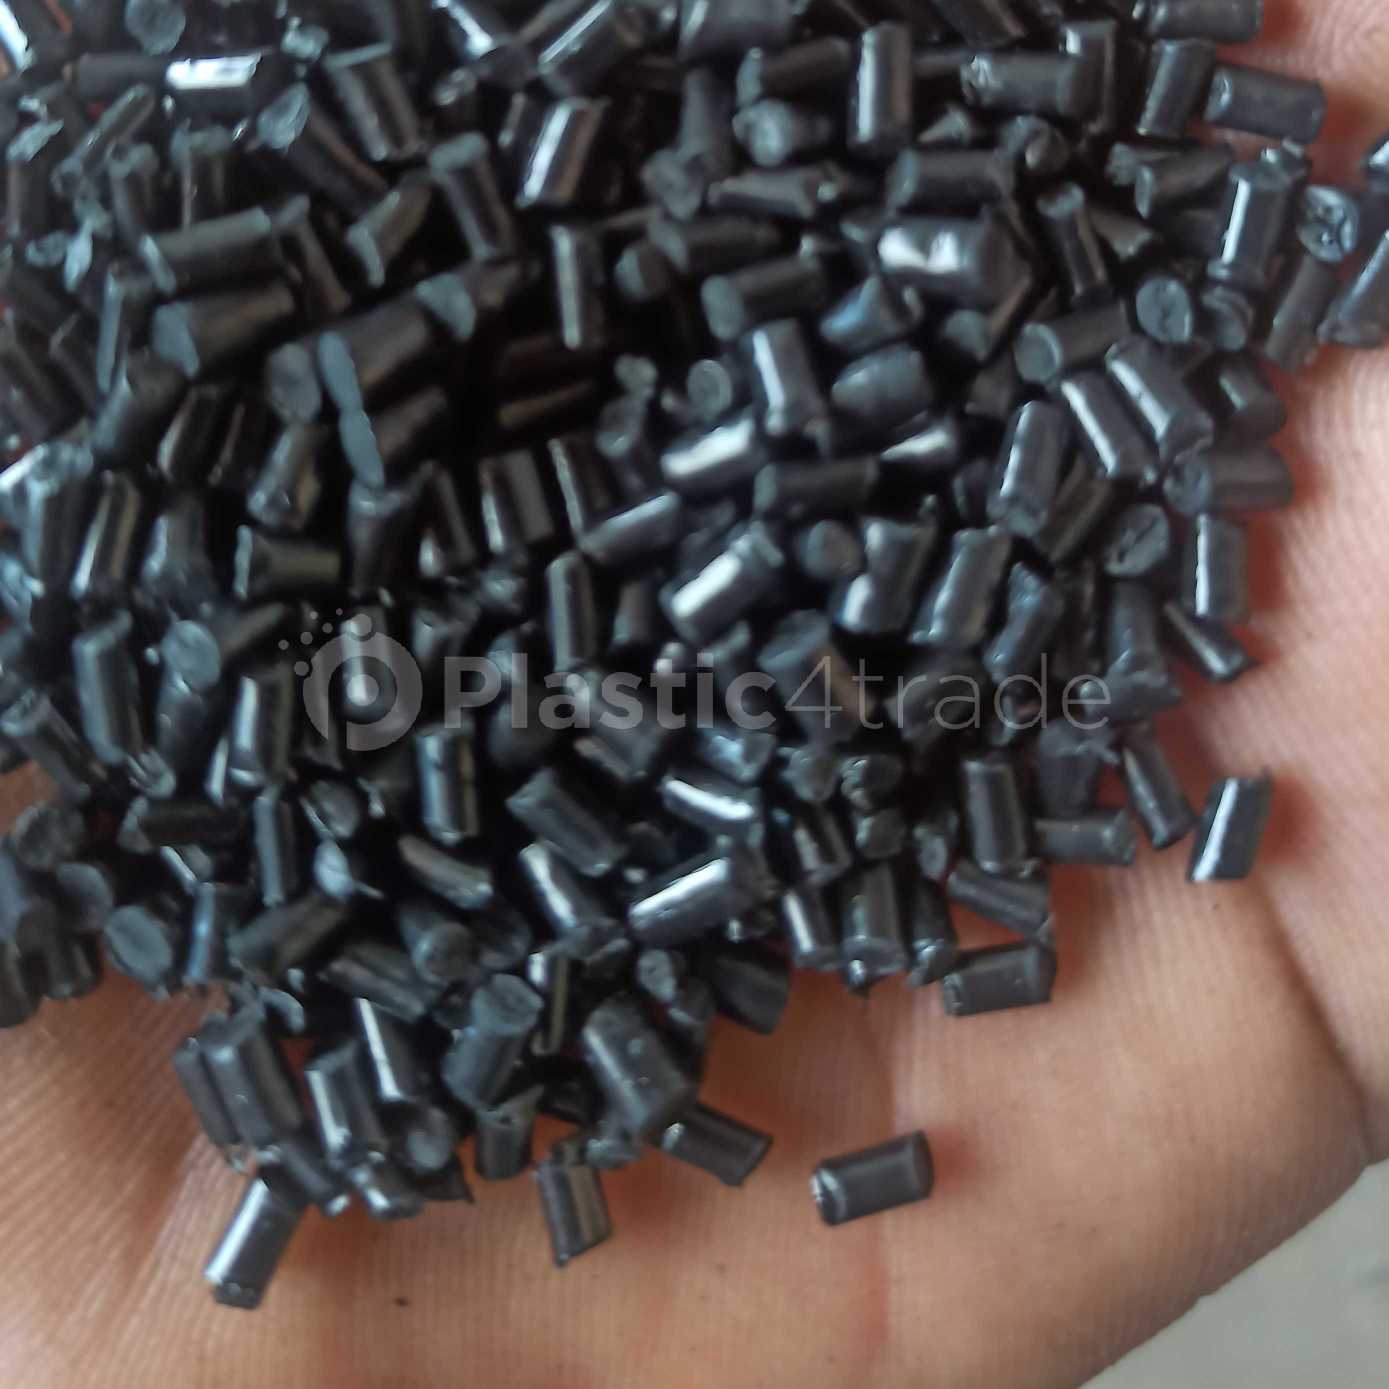 LDPE ABS Scrap Injection Molding tamil nadu india Plastic4trade